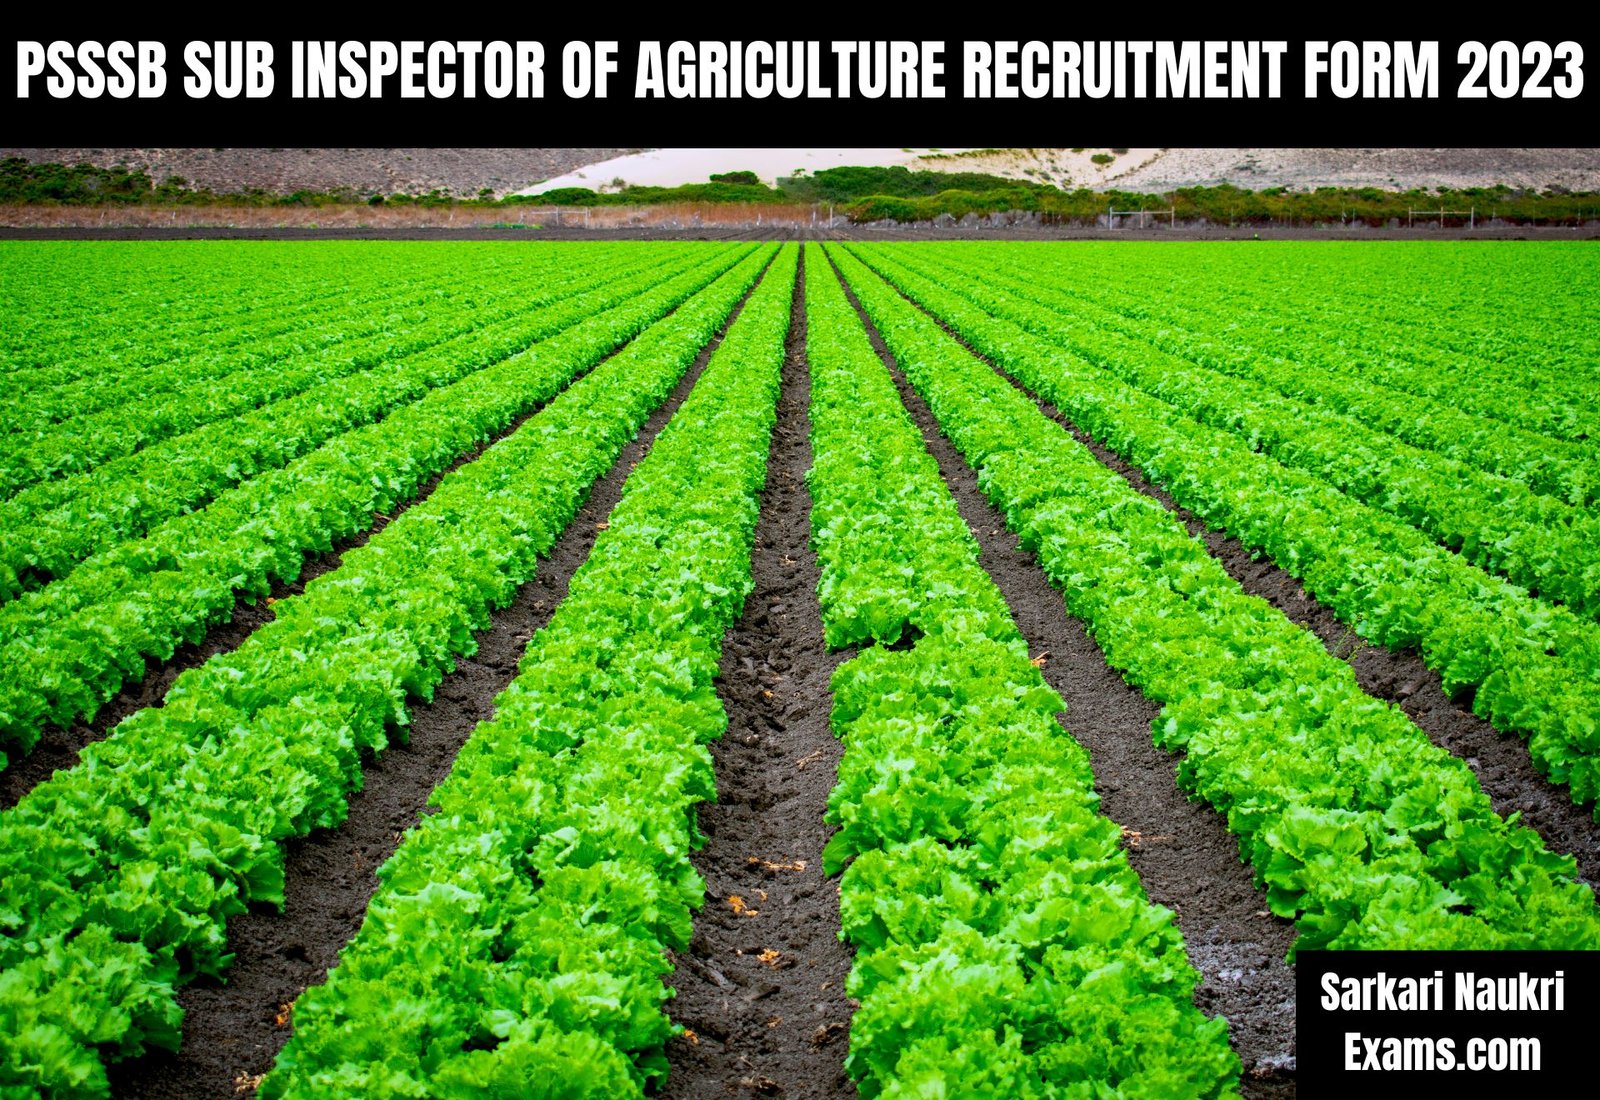 PSSSB Sub Inspector of Agriculture Recruitment Form 2023